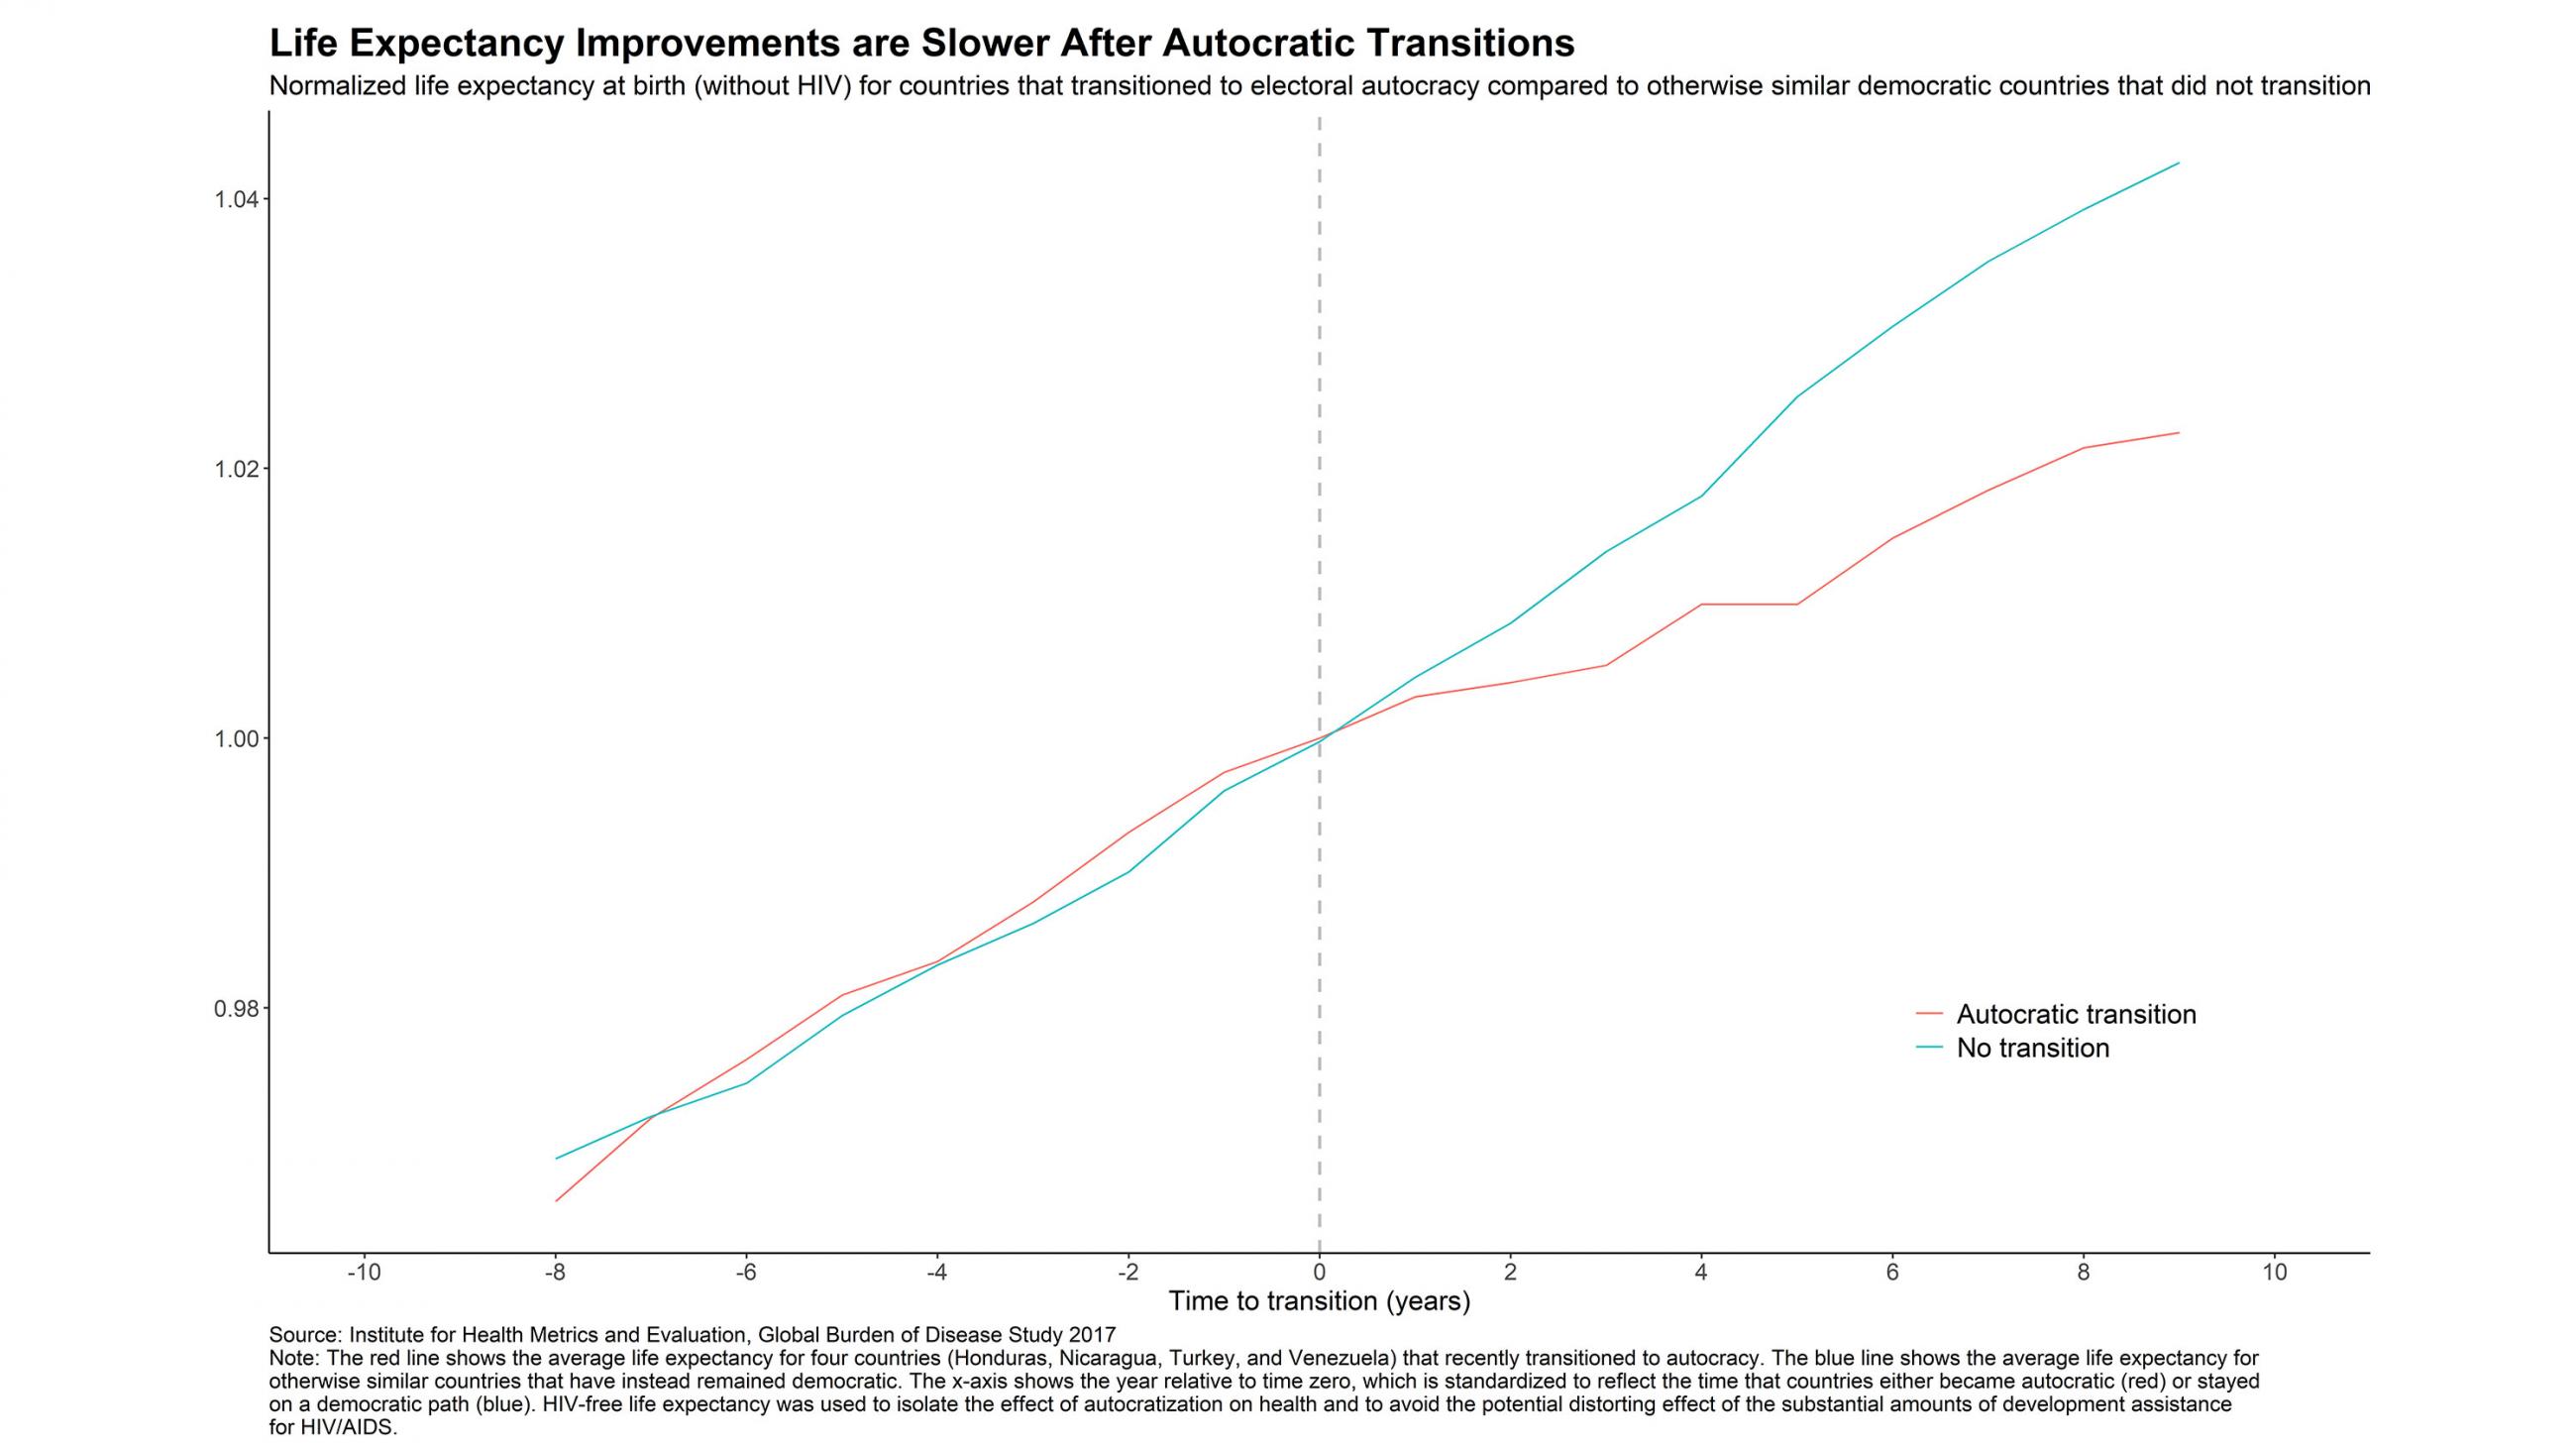 Life expectancy improvements are slower after autocratic transitions.